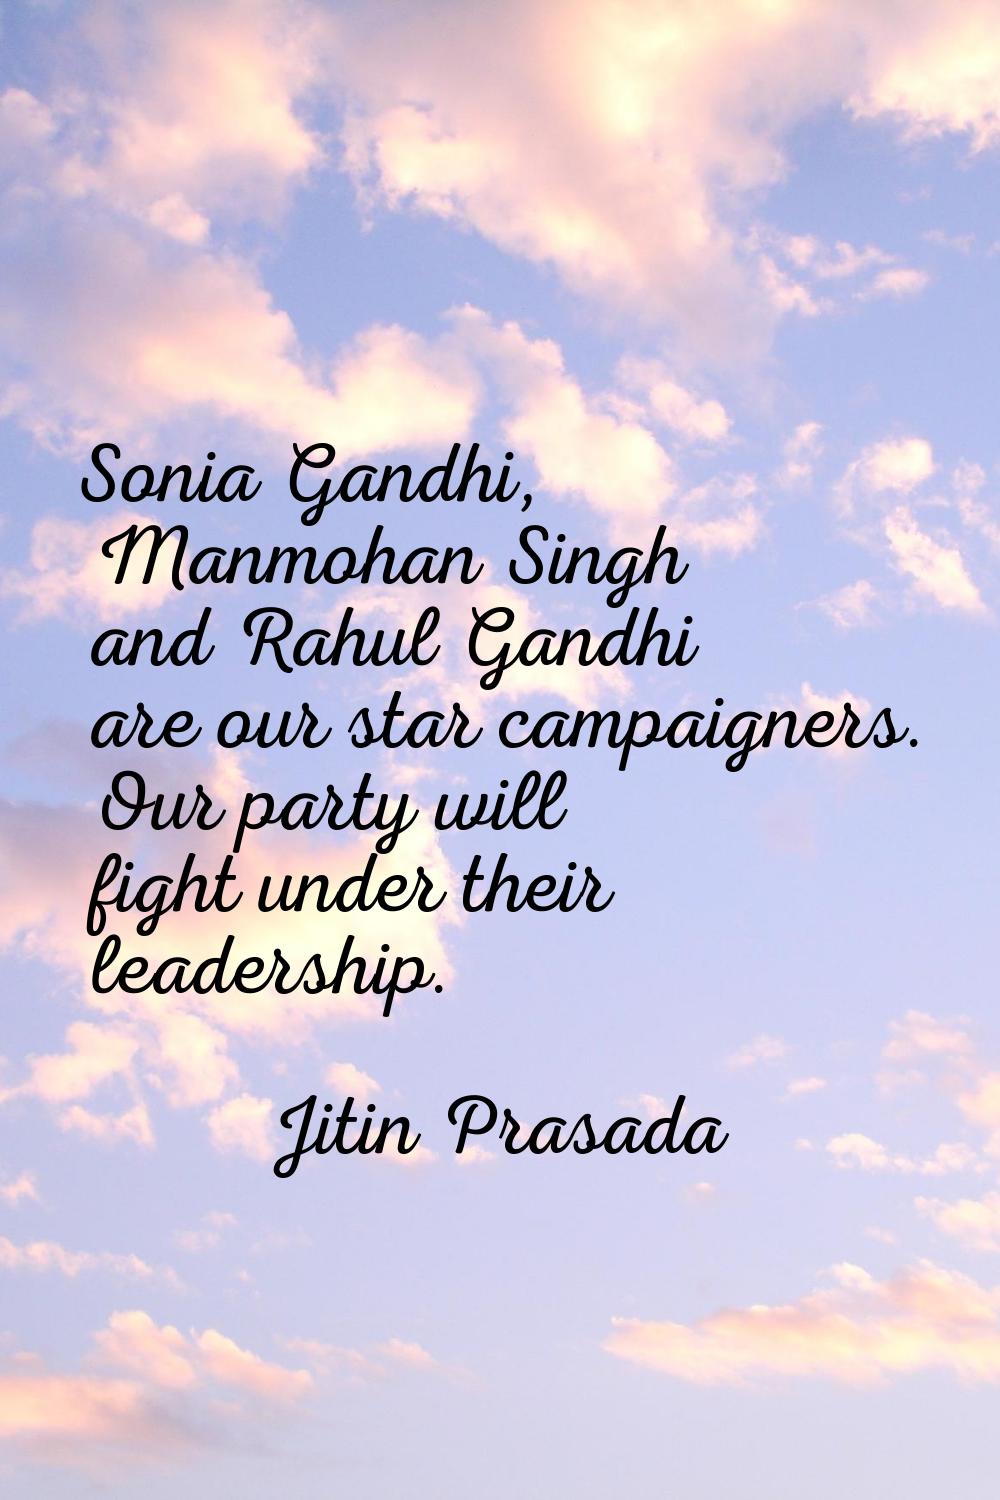 Sonia Gandhi, Manmohan Singh and Rahul Gandhi are our star campaigners. Our party will fight under 